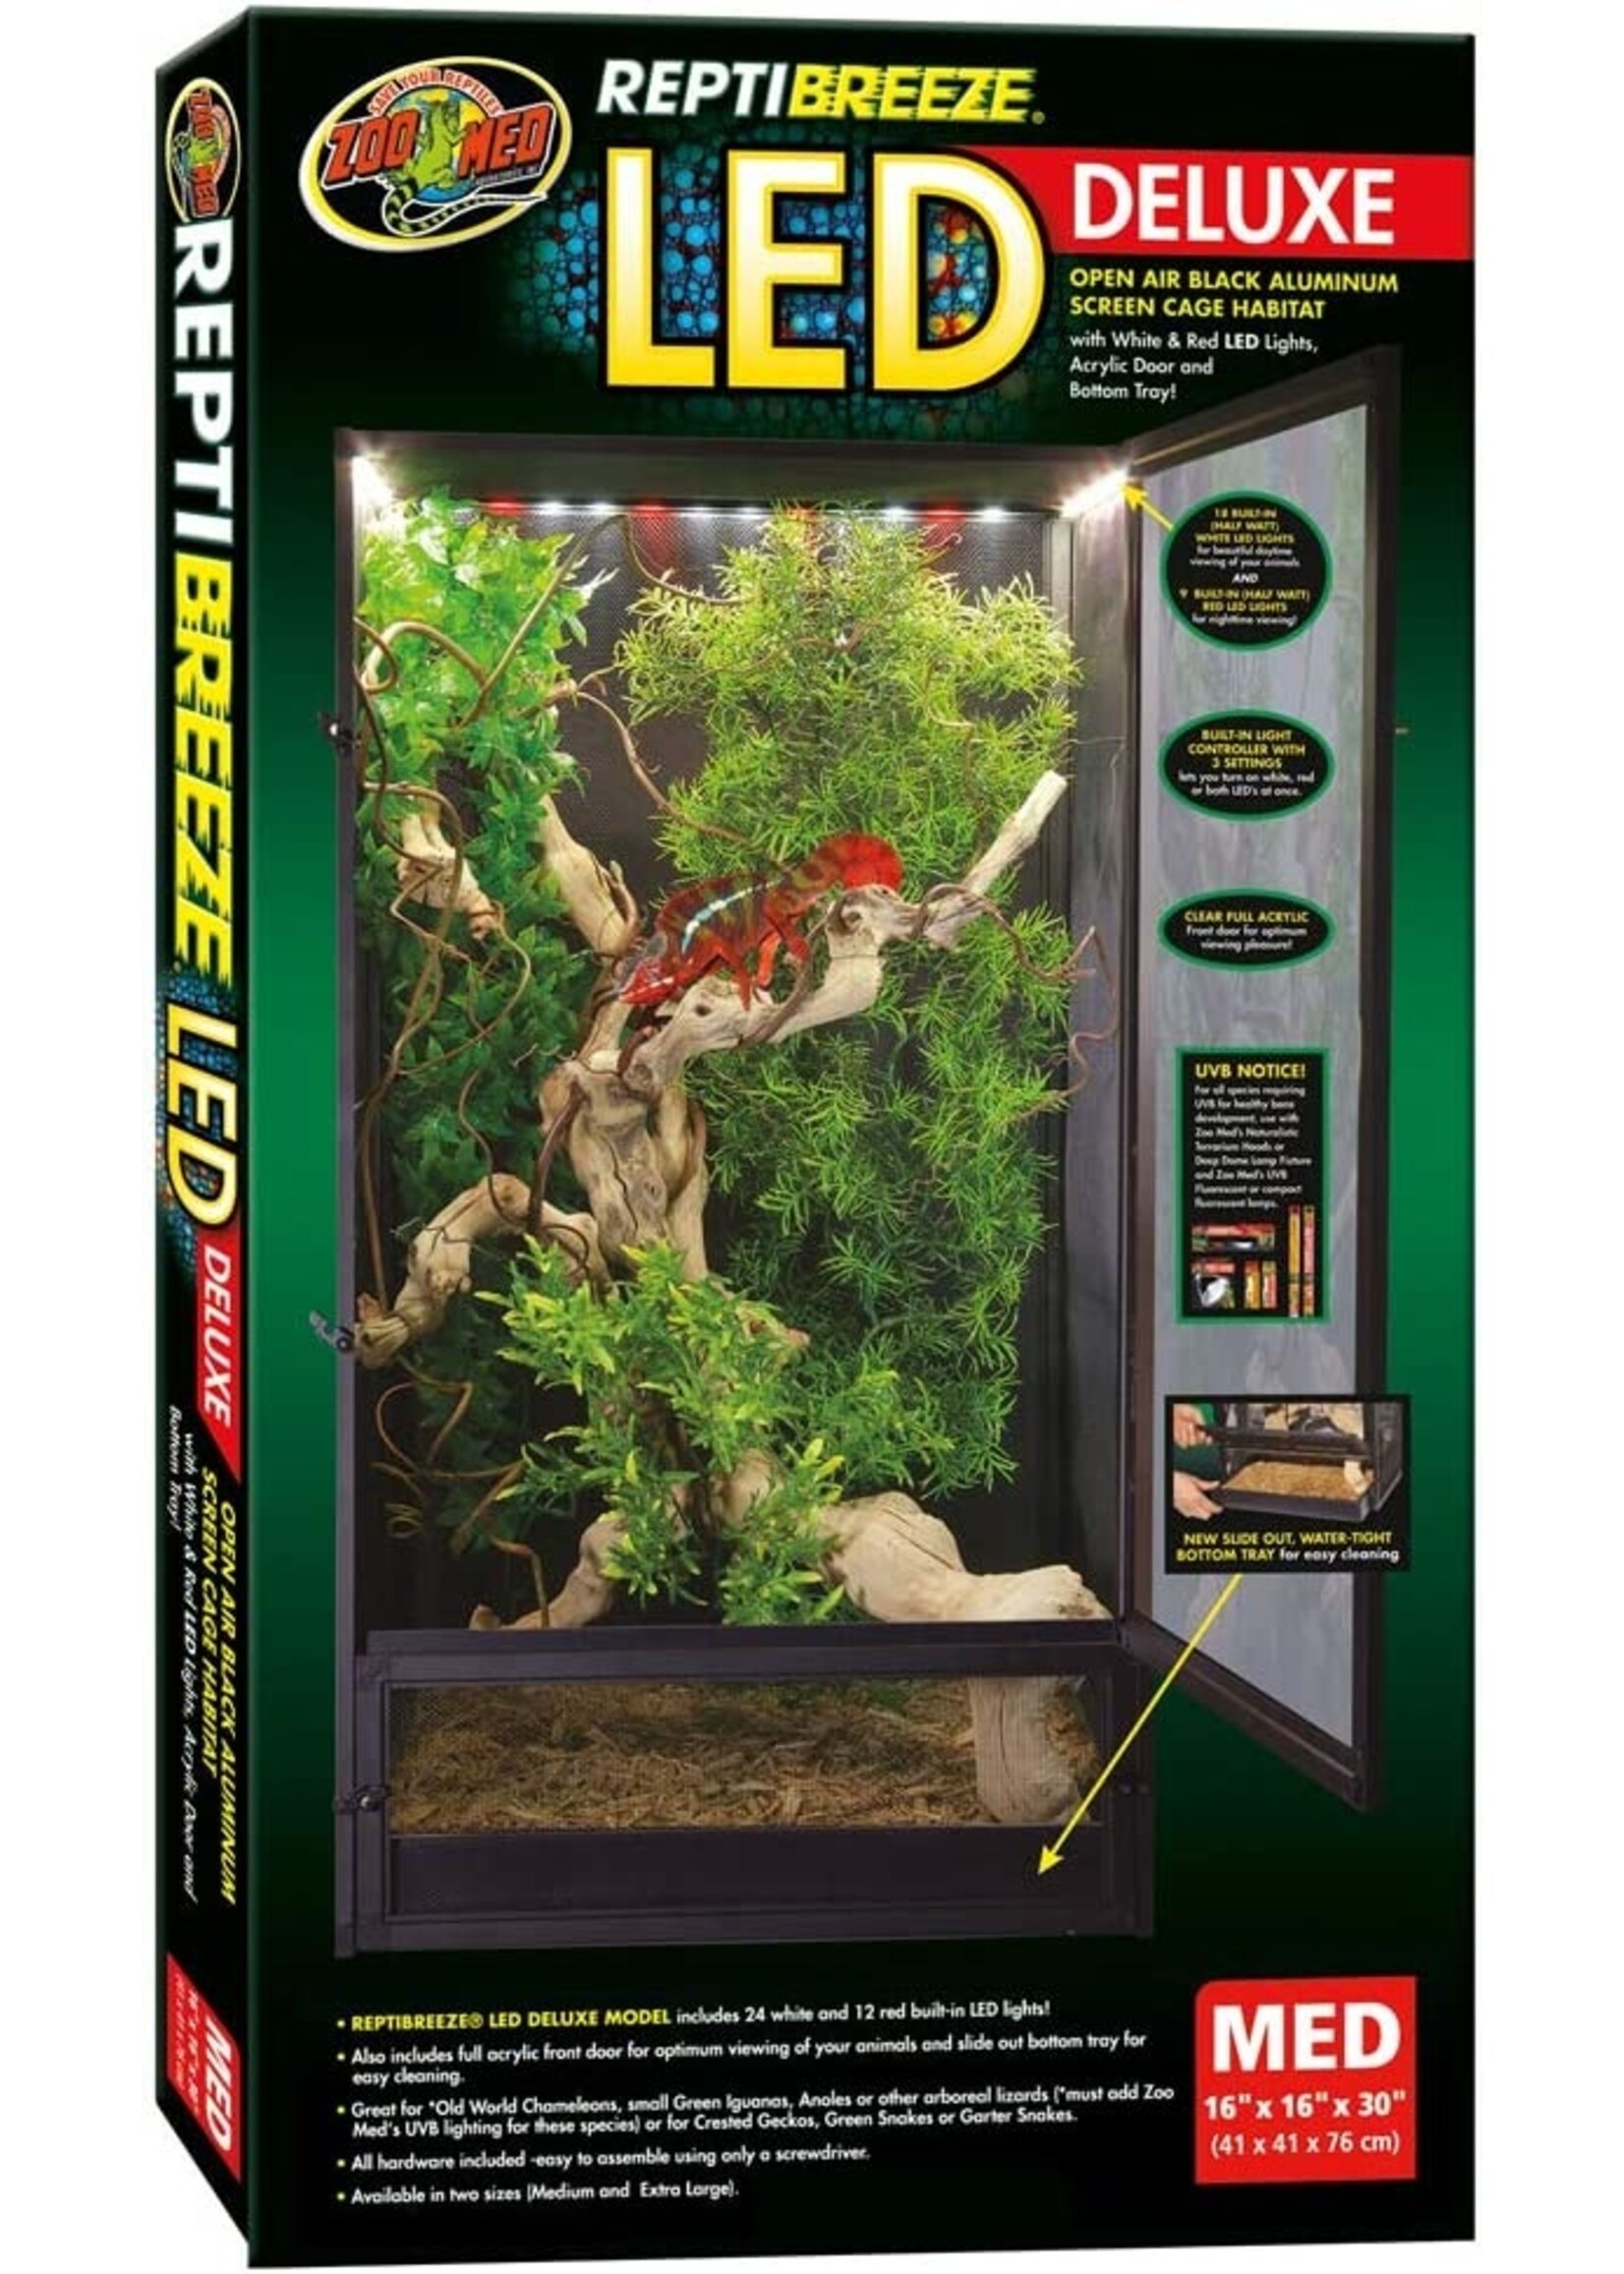 Zoo Med Zoo Med ReptiBreeze LED Deluxe Screen Cage Medium 16 x 16 x 30" w/ Built in LED Lights